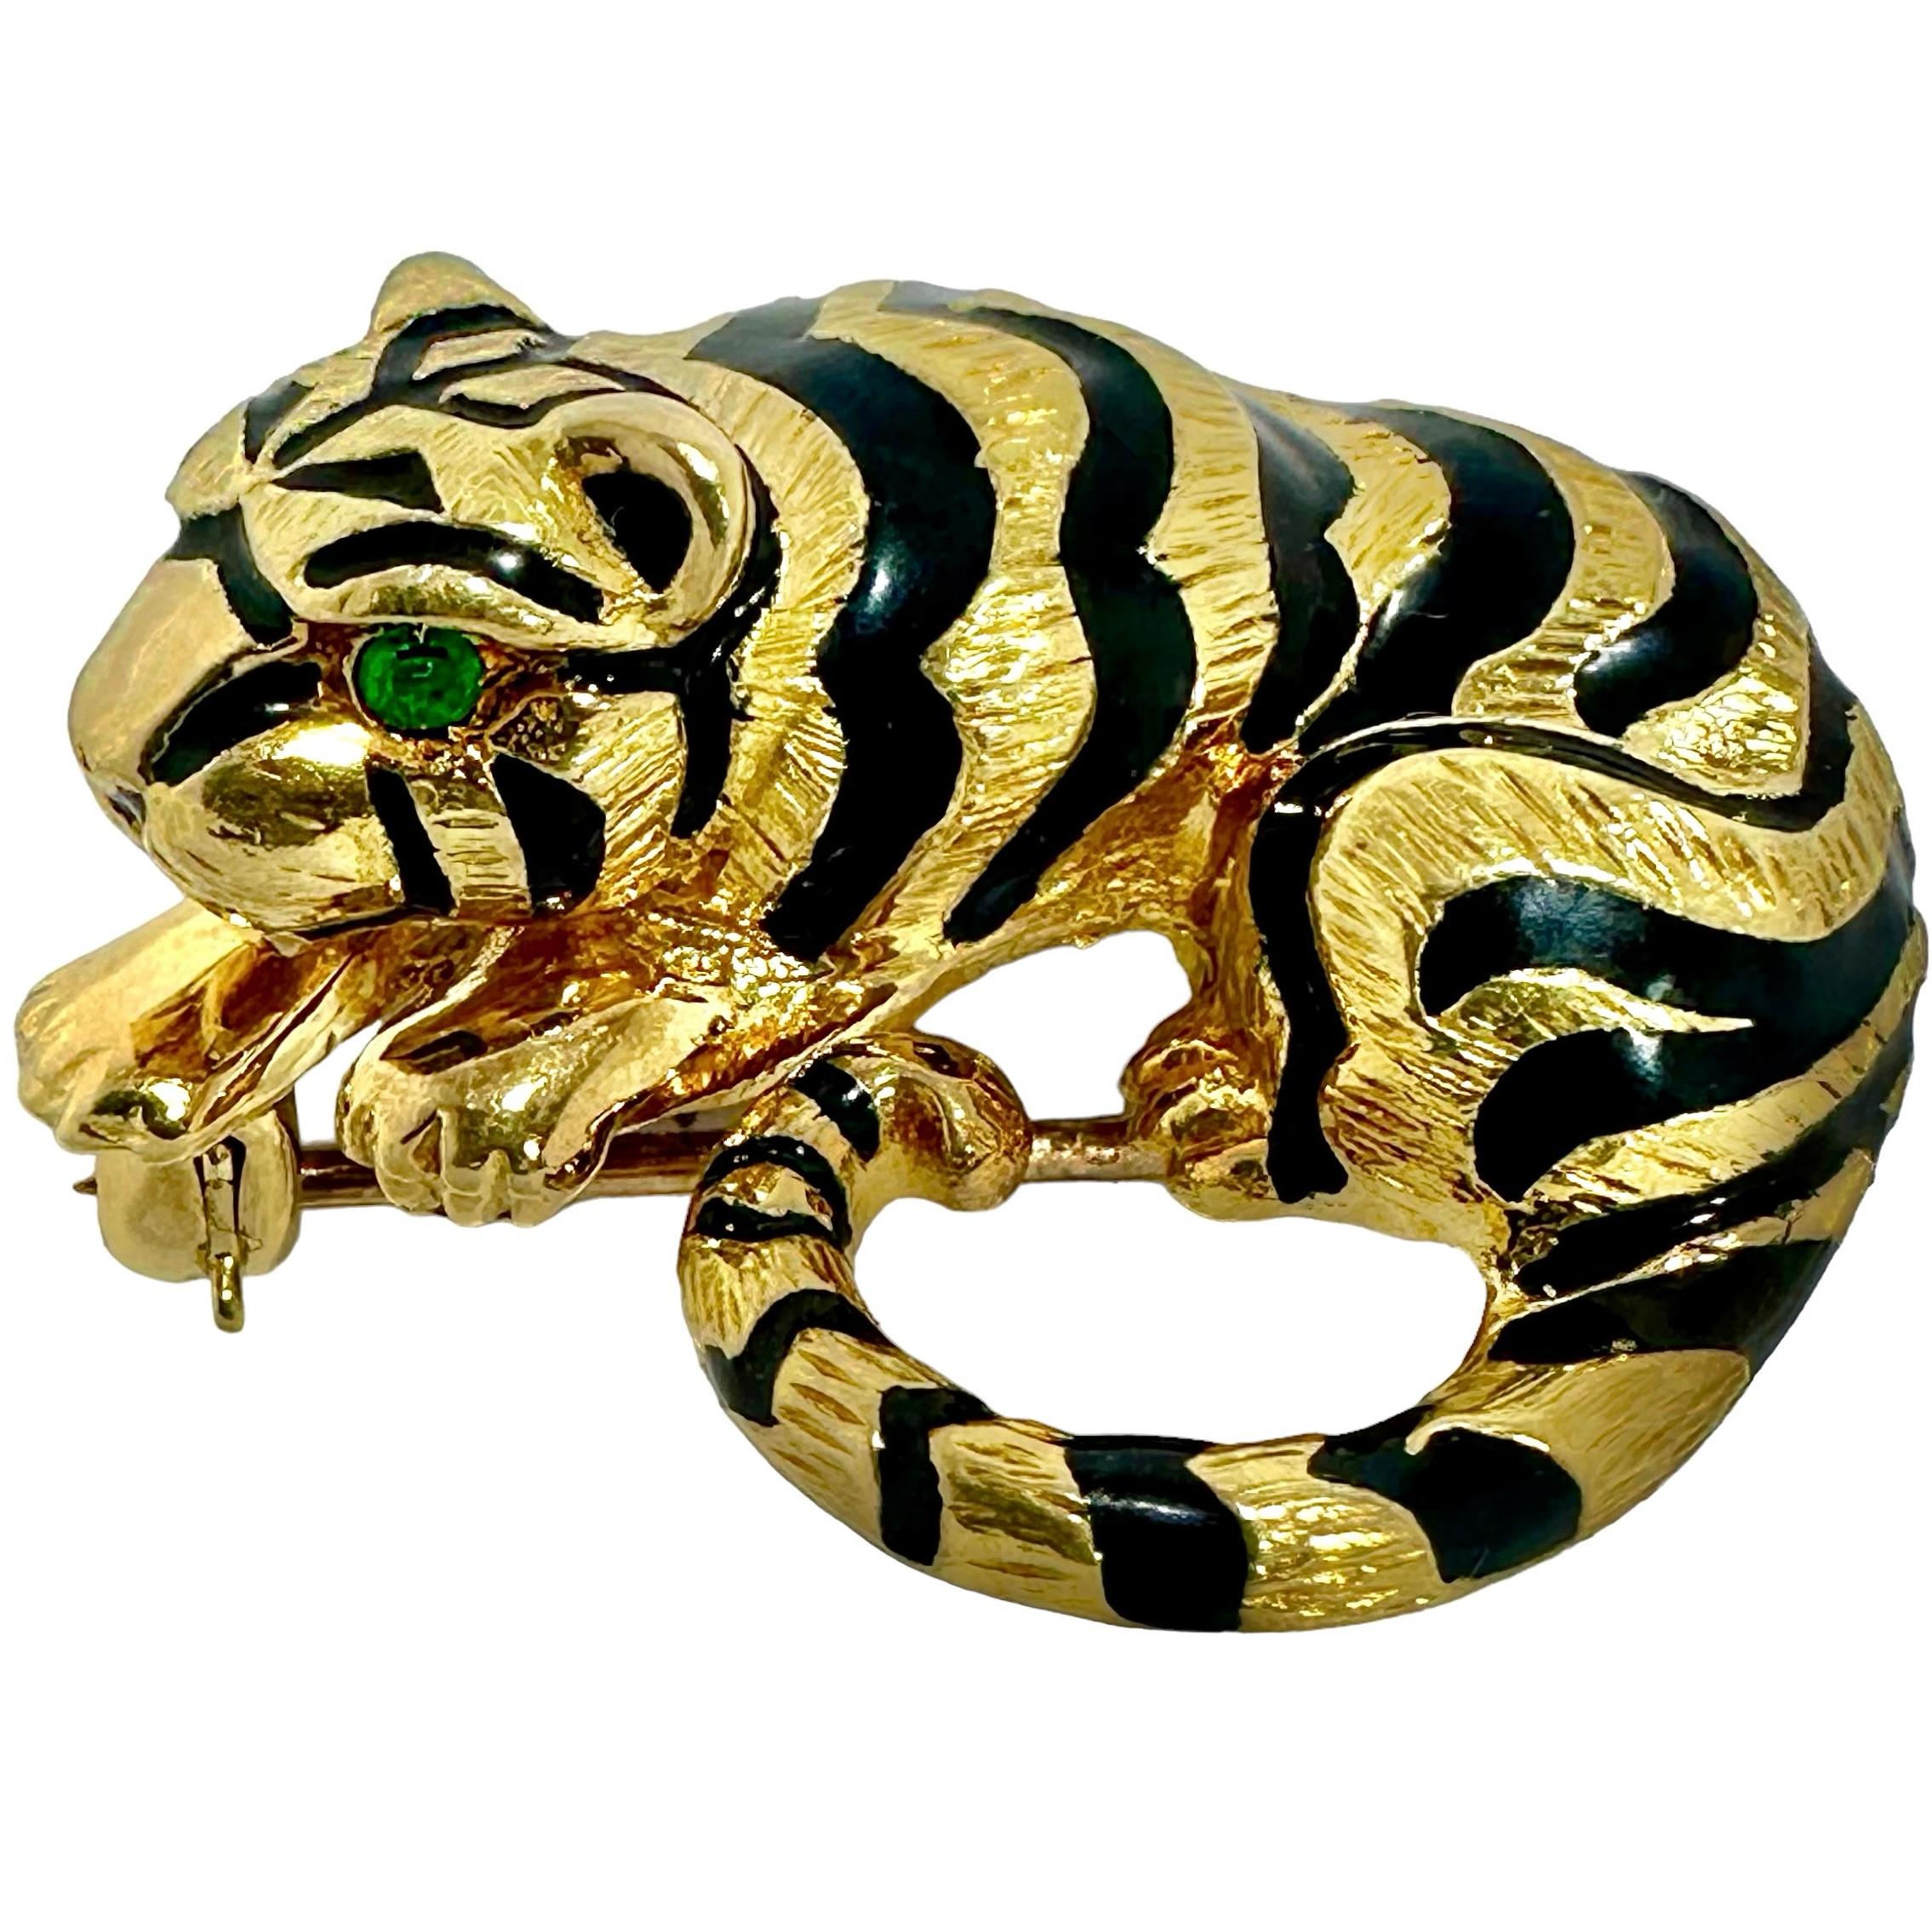 This petite but very bold and dramatic 18k yellow gold tiger brooch appears at rest, but ready to pounce. With a length of 1 3/16 inches, width of 1 inch and height of 1/2 inch, this very dimensional brooch is certain to make a lasting impression.